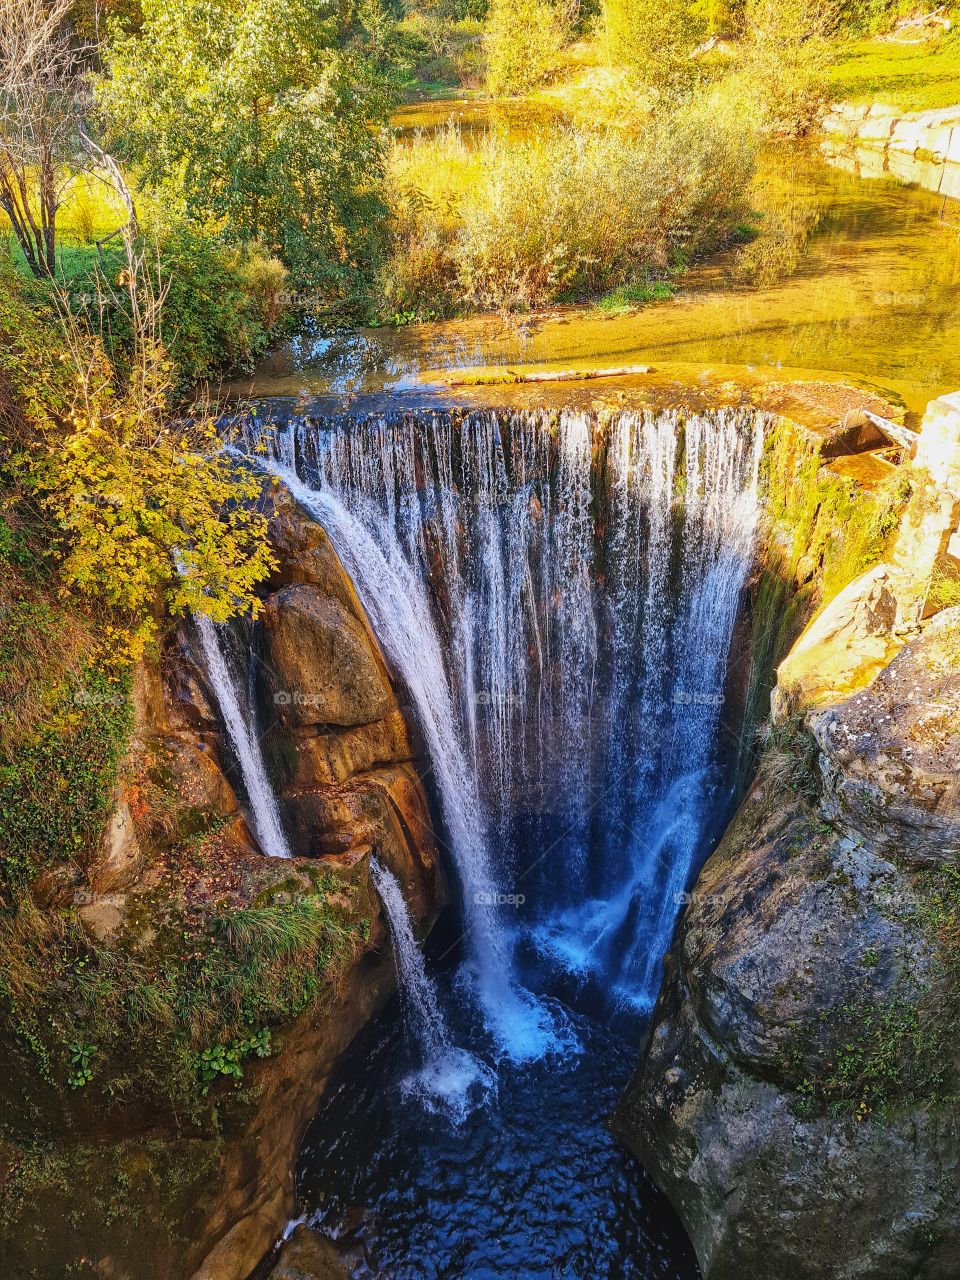 waterfall surrounded by nature and autumn colors